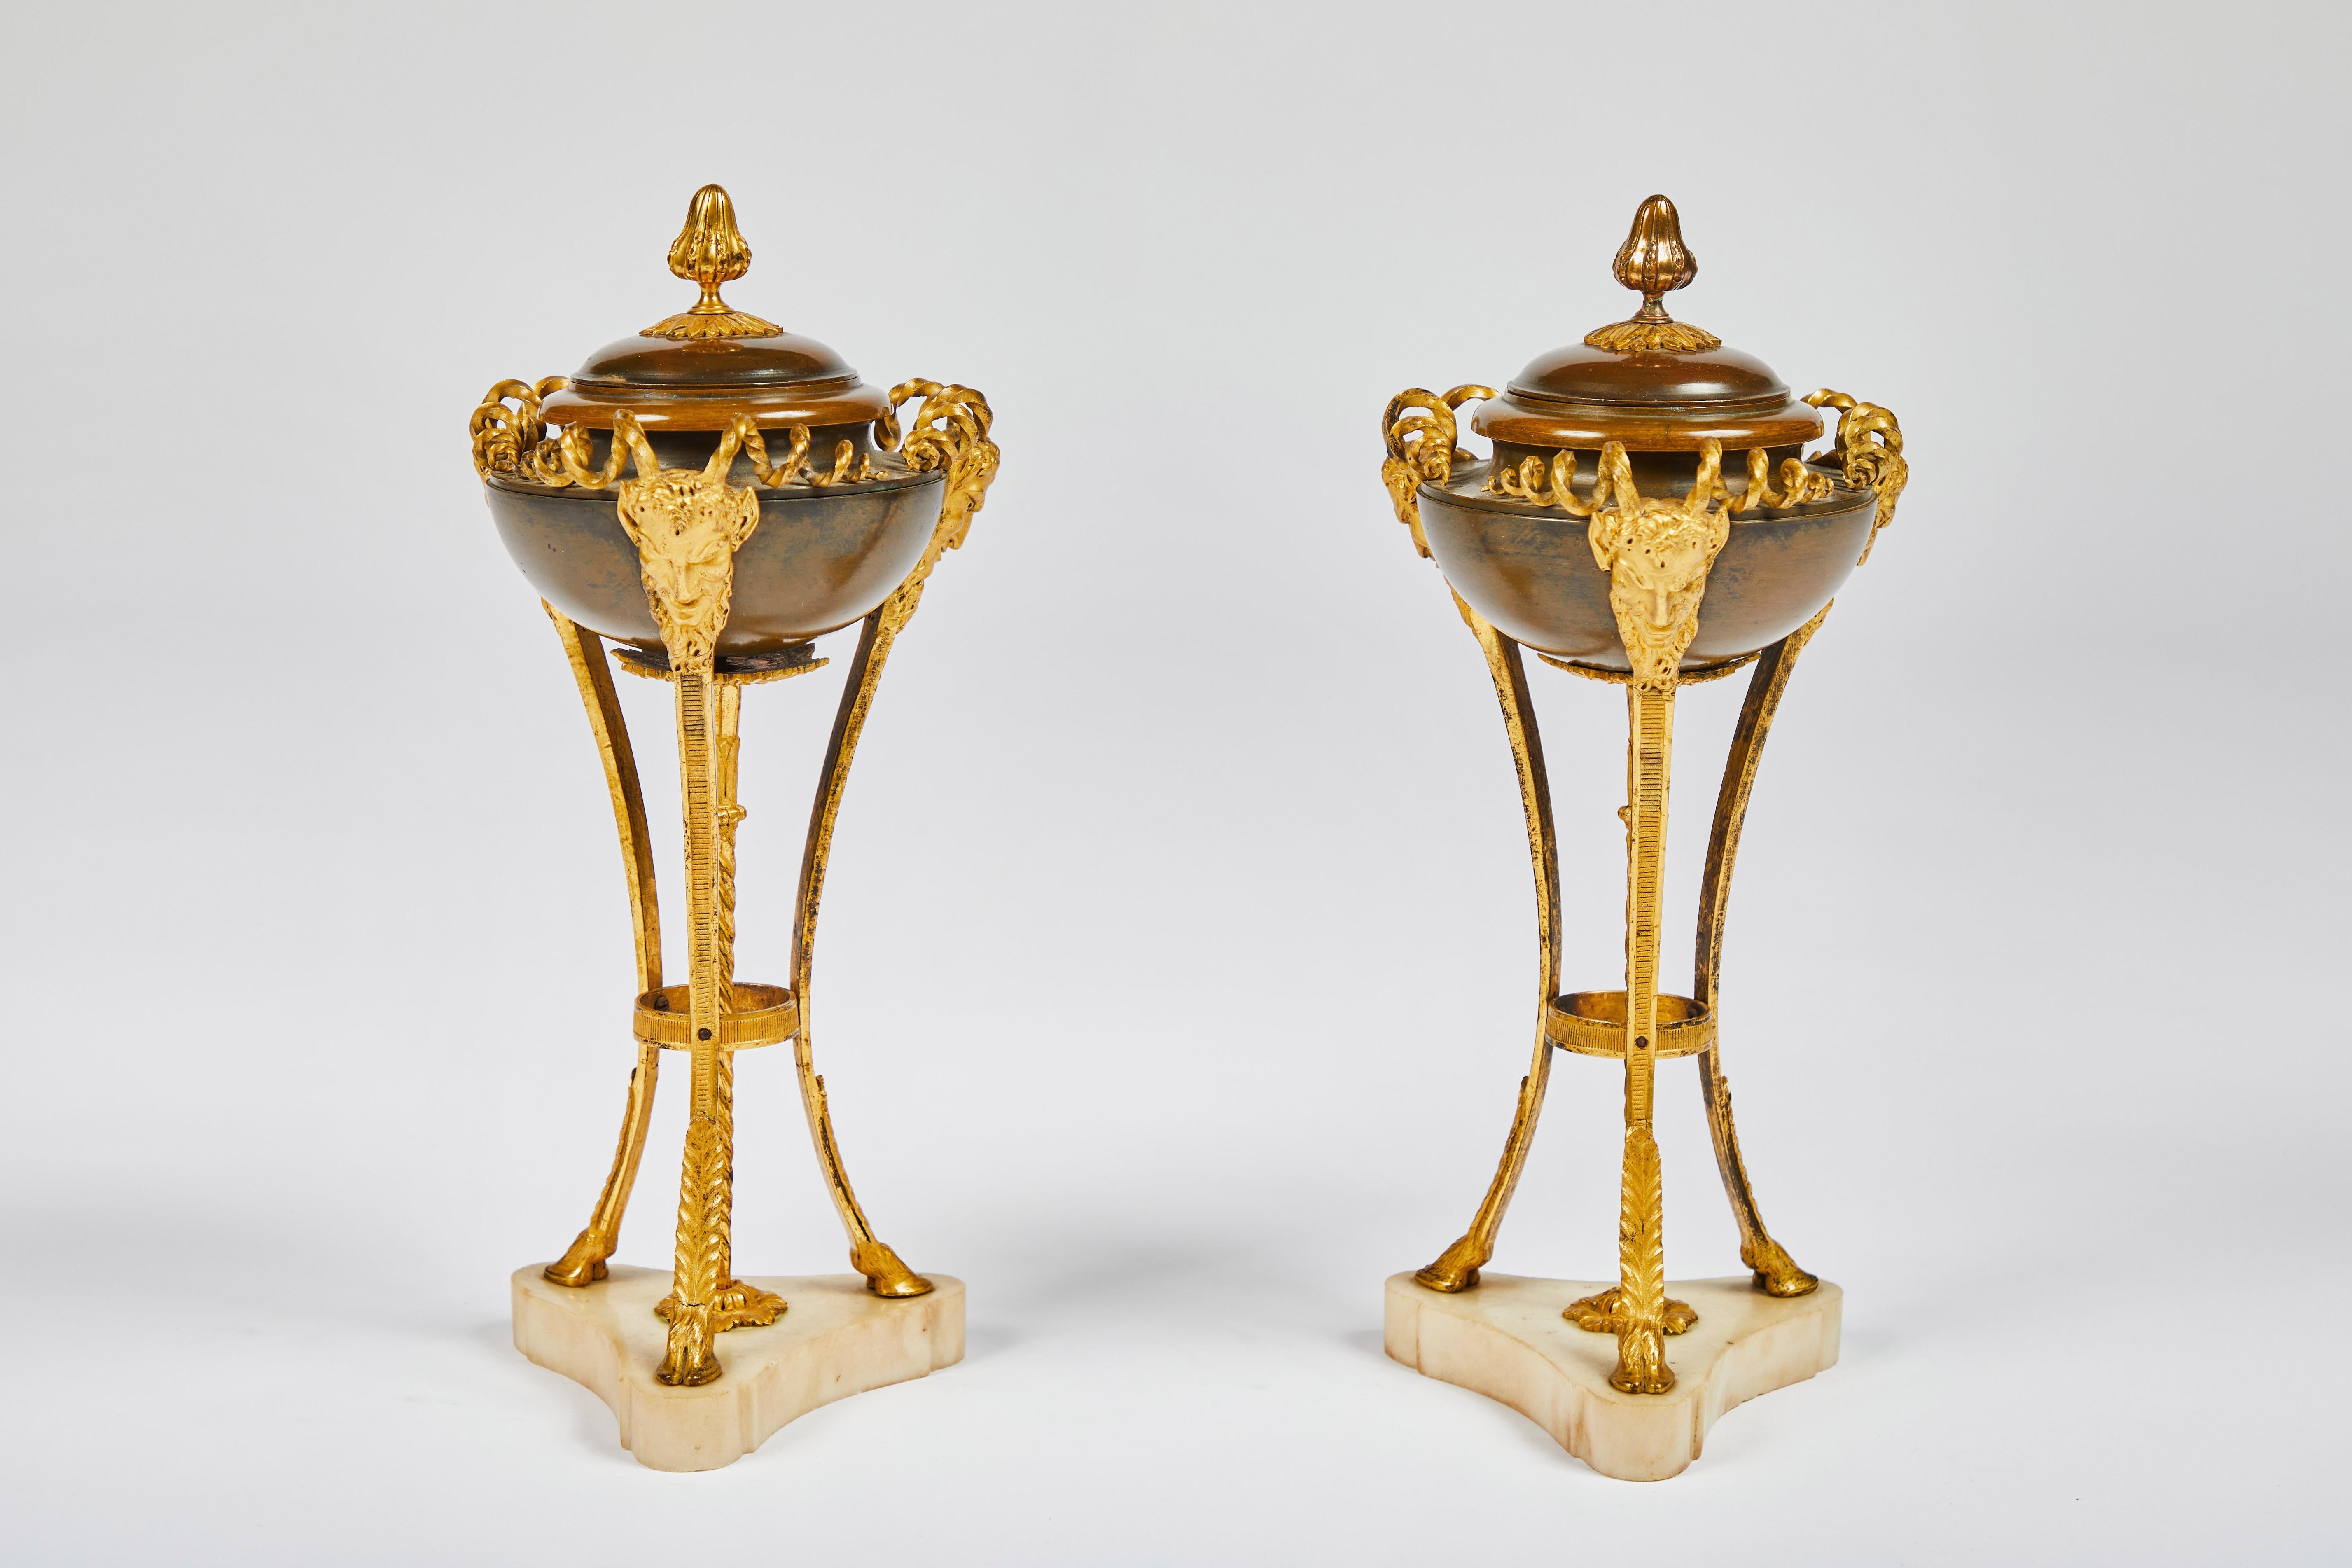 19th century, each comprising a shallow patinated bronze urn form and cover with gilt bronze finial, supported by three gilt bronze satyr masks with spiraling horns, terminating in hoof feet mounted on white marble base.